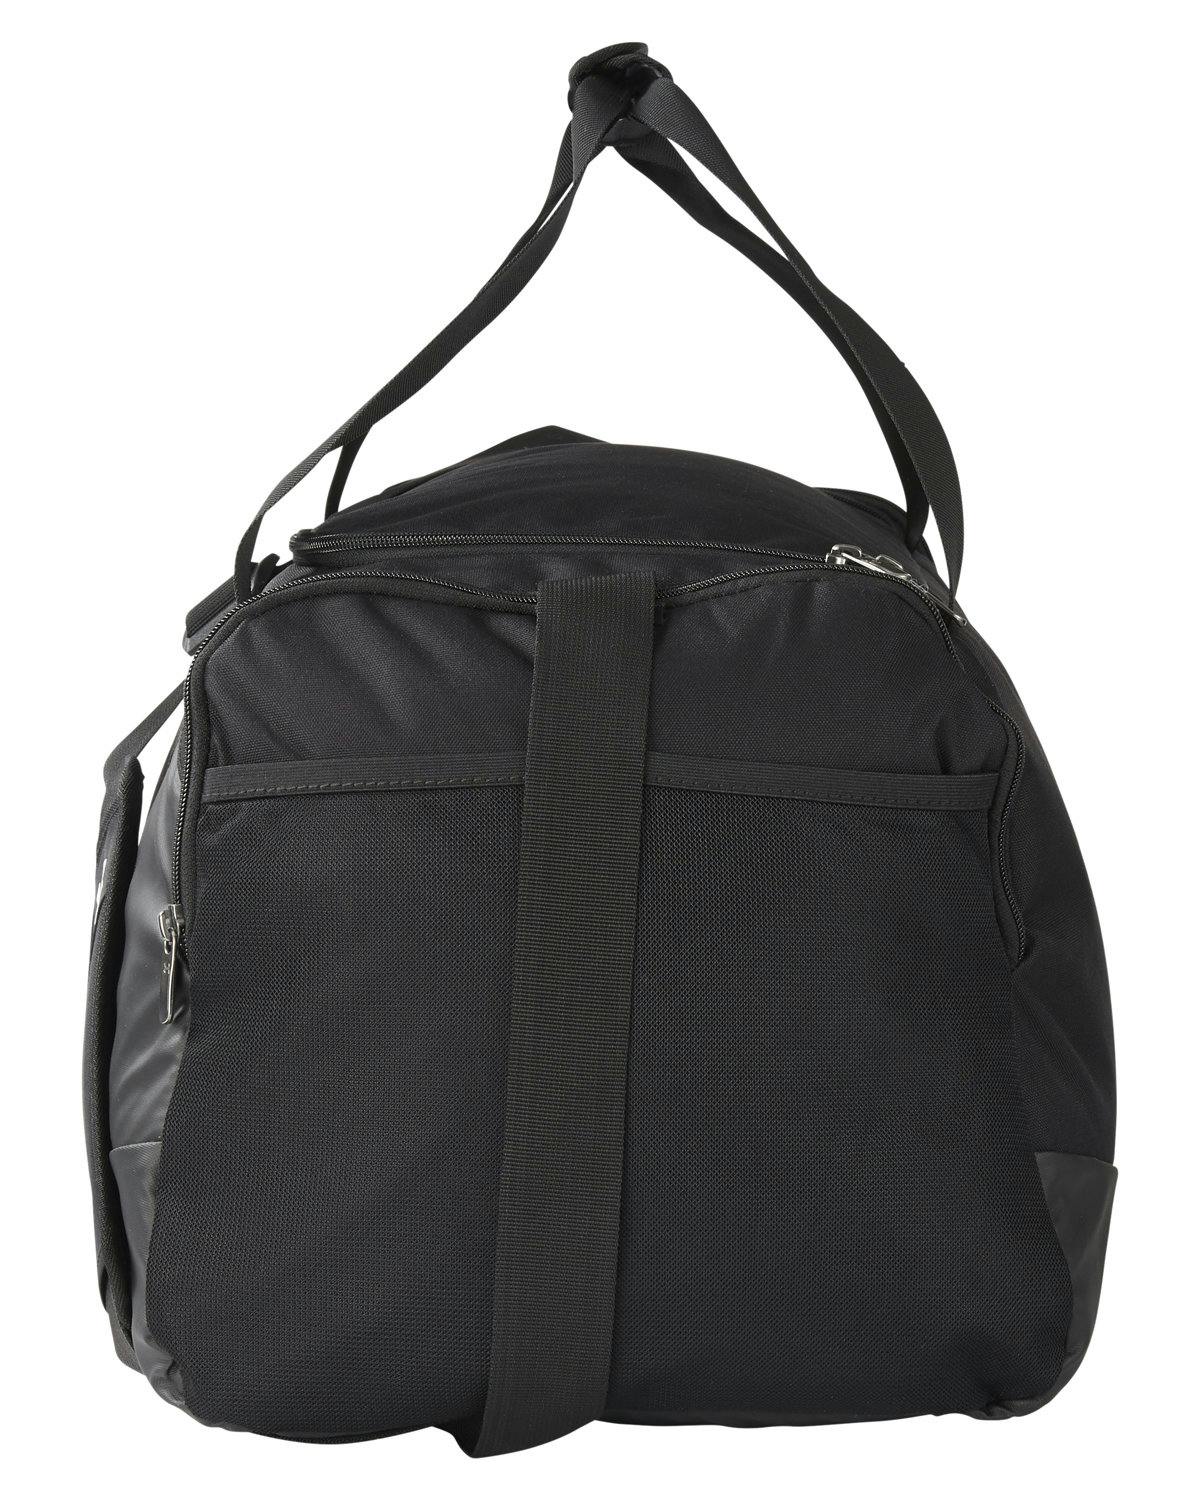 Image for Undeniable 5.0 MD Duffle Bag